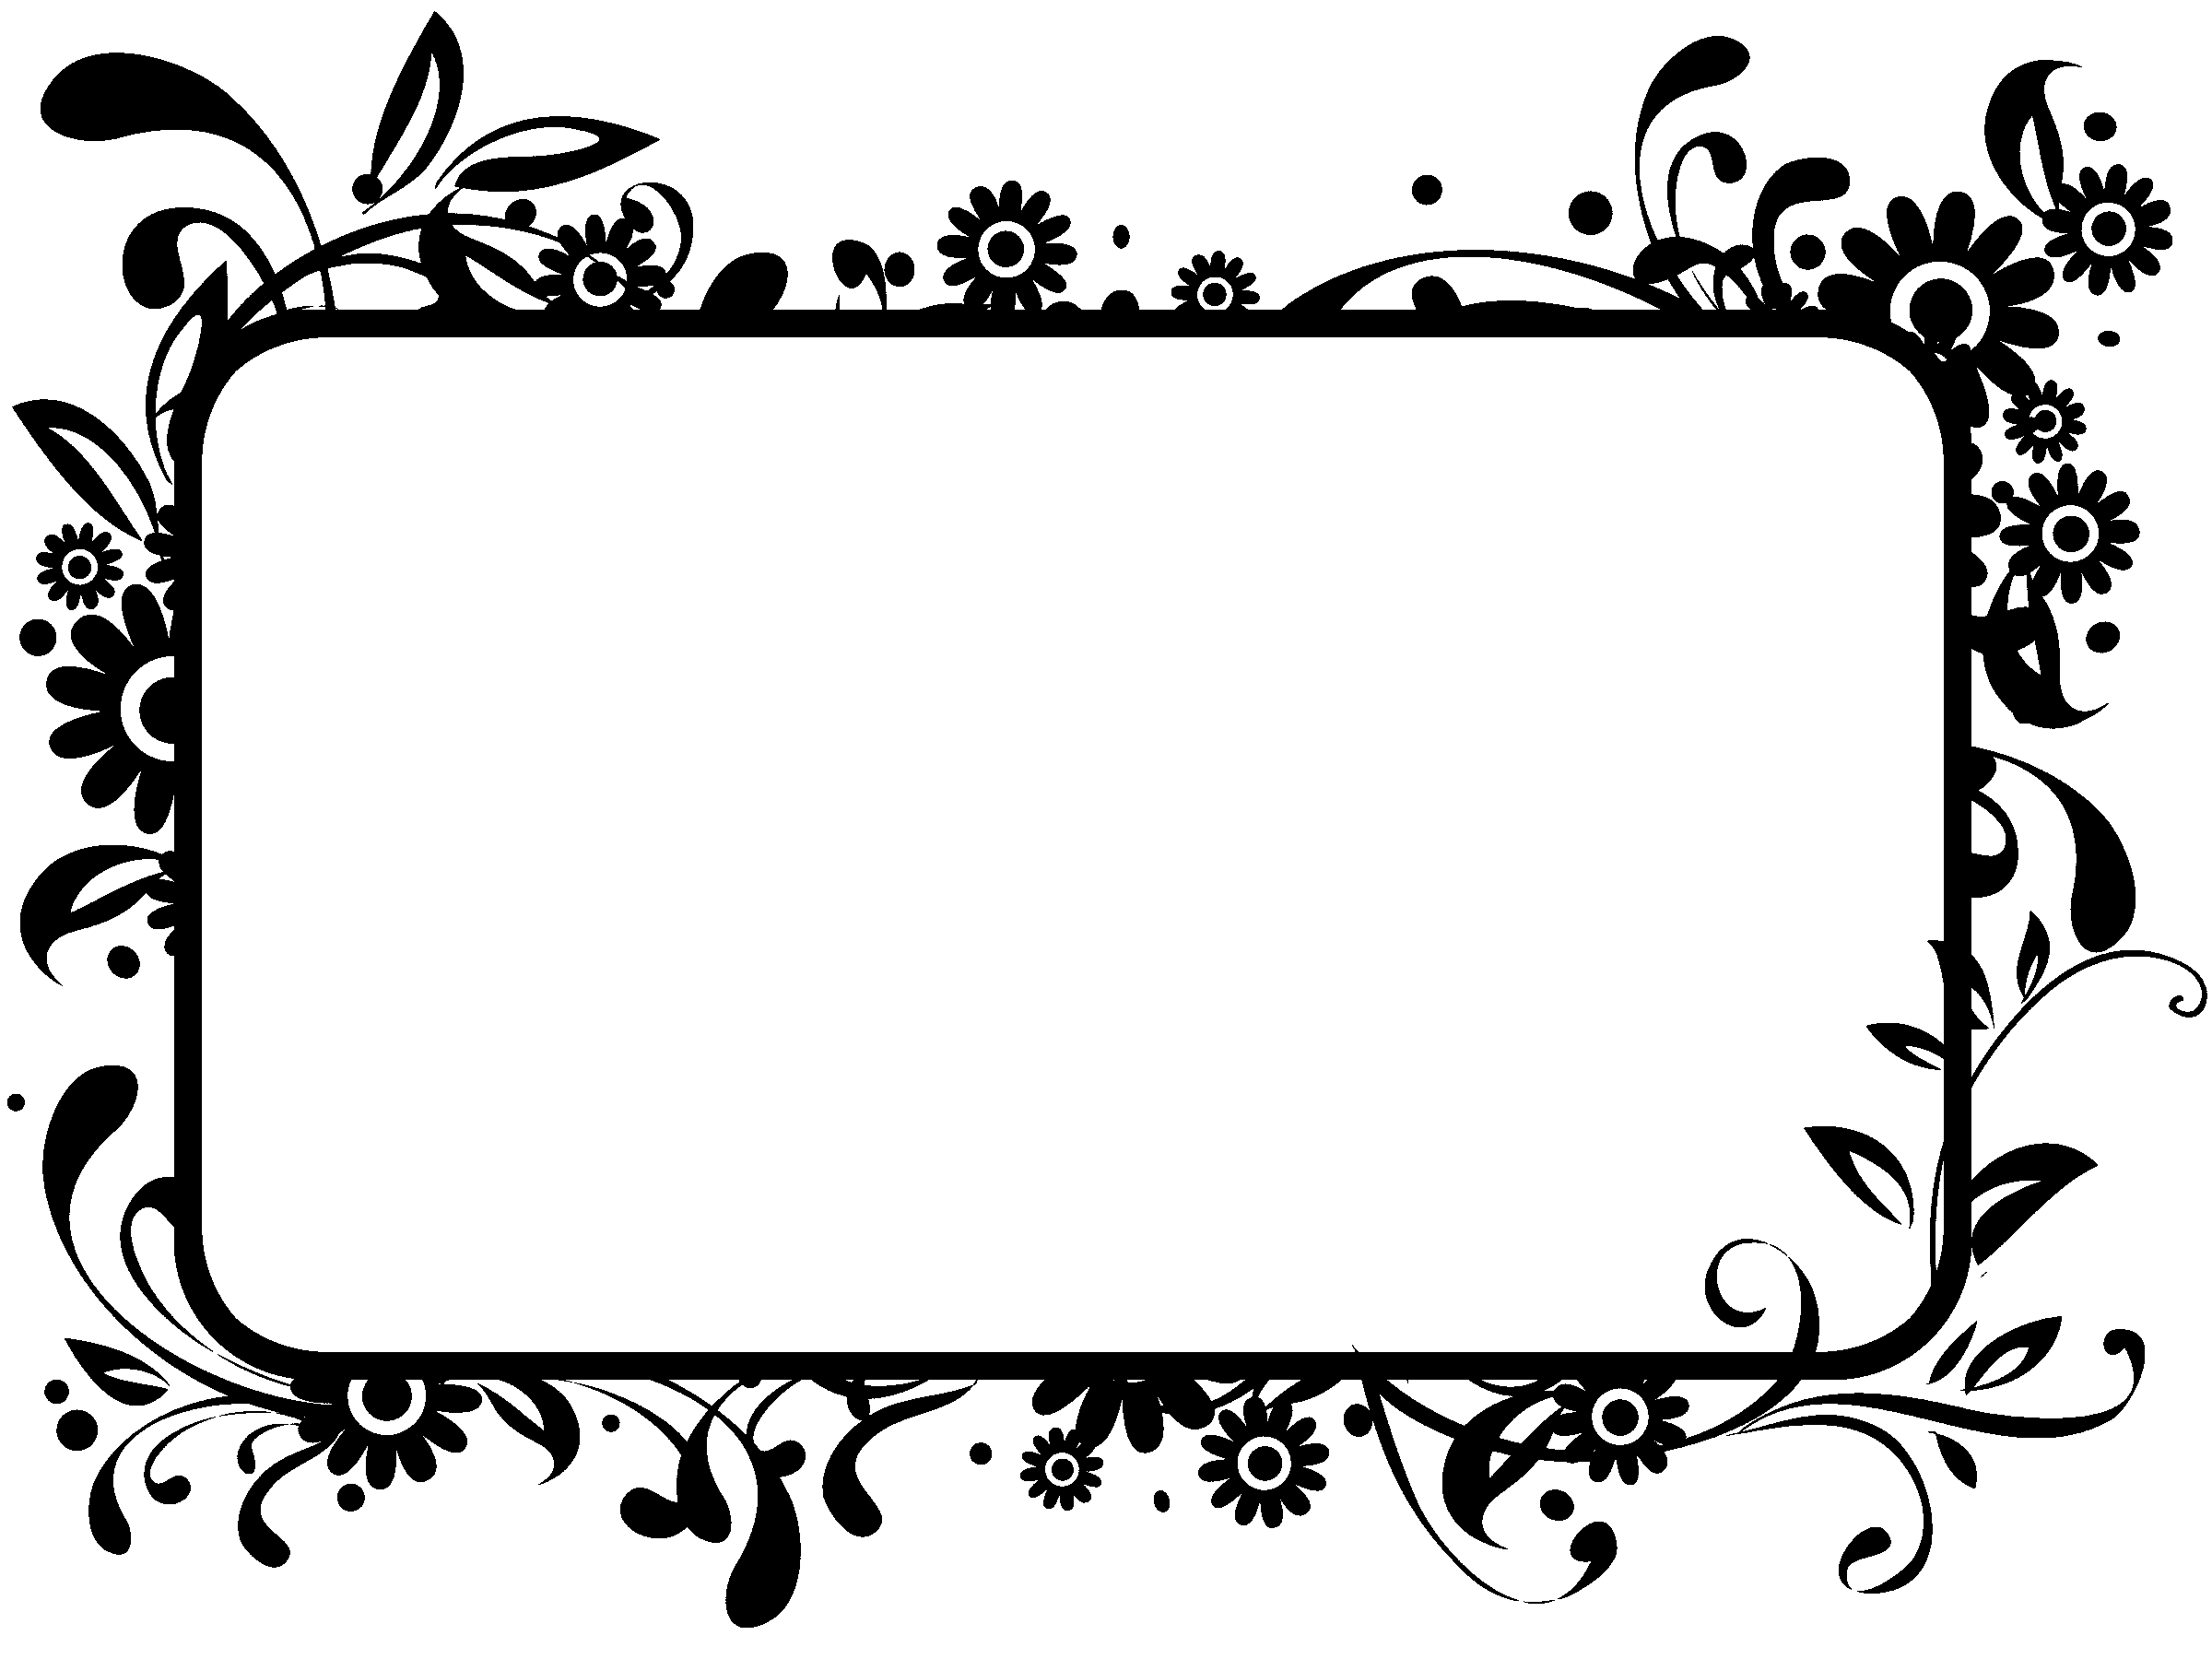 Free cliparts borders download. Clipart border marriage